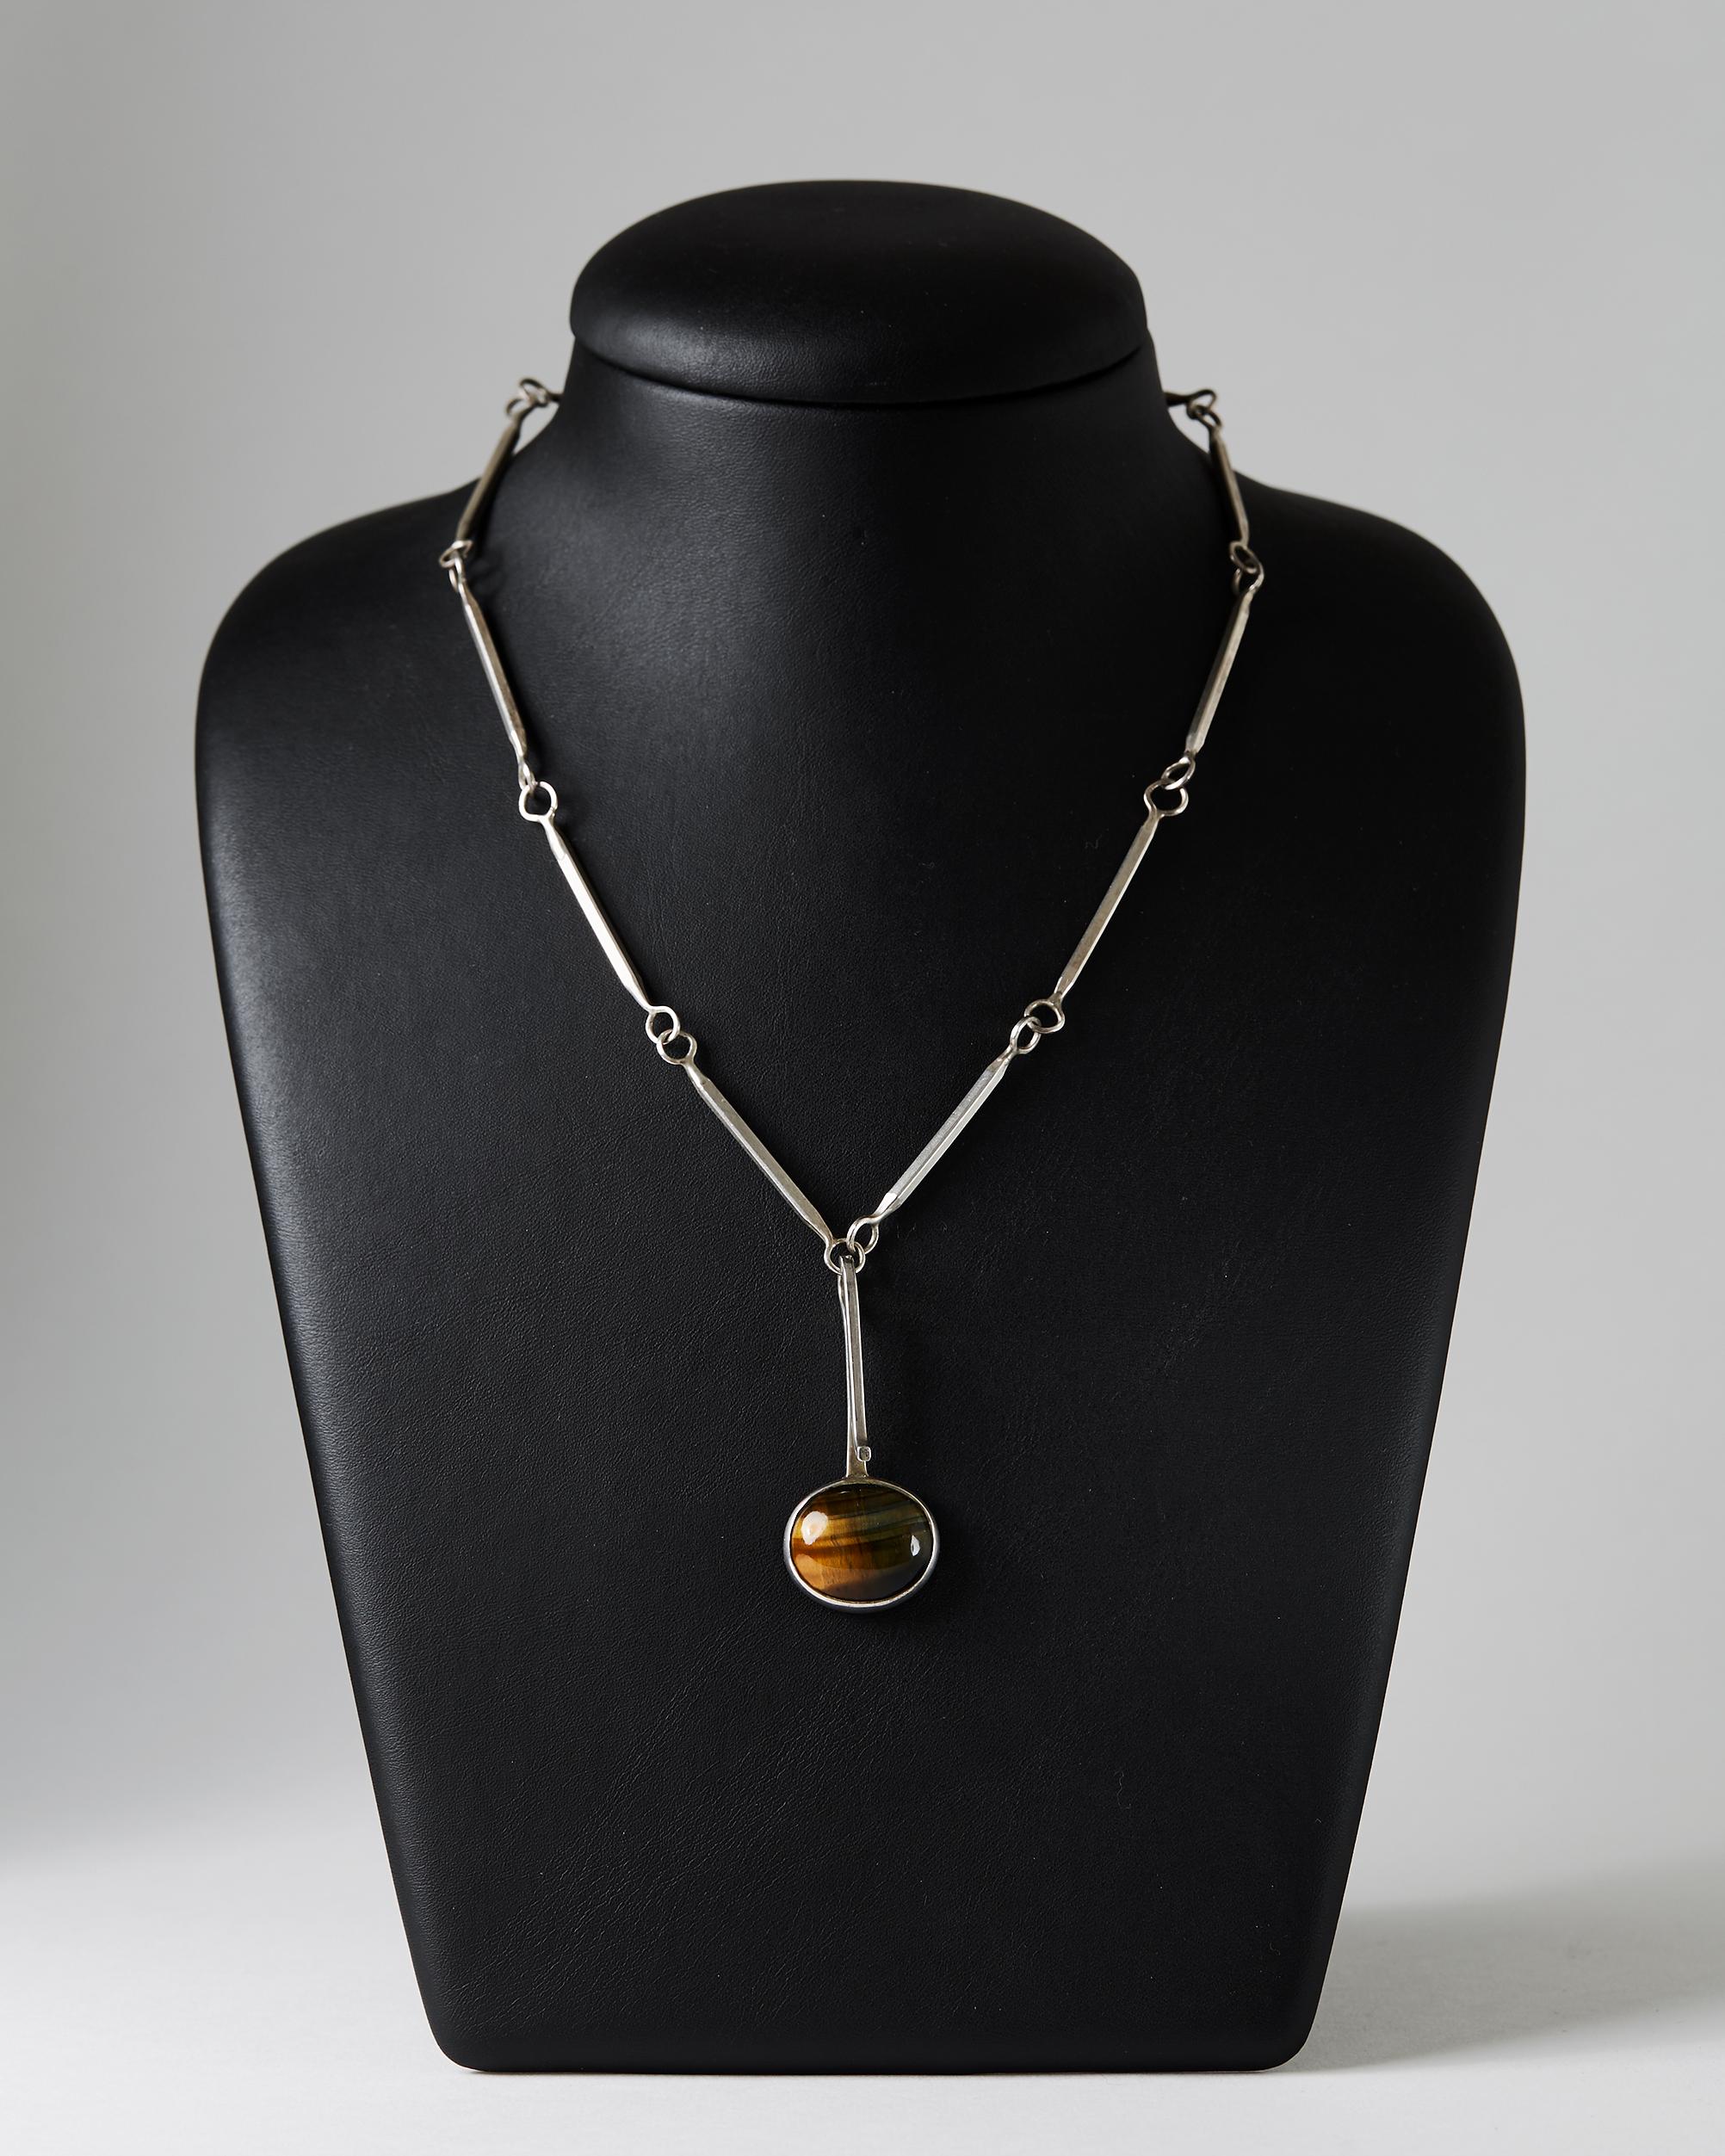 Sterling silver and Tiger's eye.

Length of the chain: 66 cm/ 26''
Length of the pendant. 5 cm/ 2''